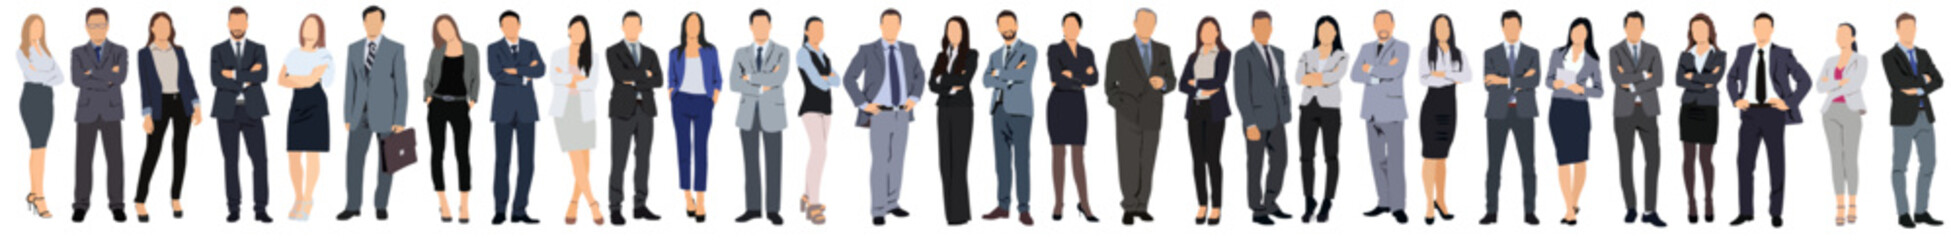 people working group of standing business people vector eps